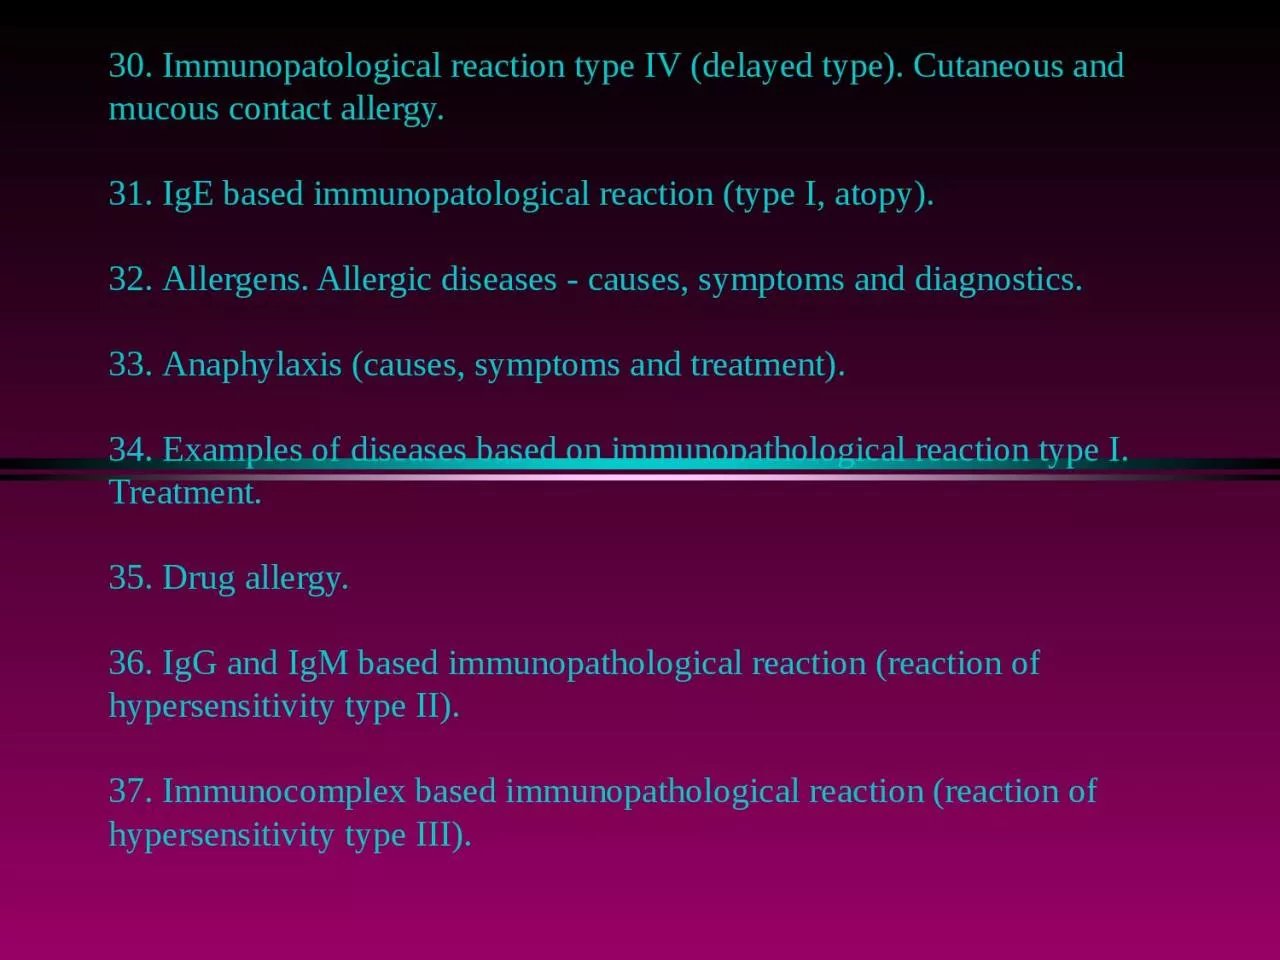 30. Immunopatological reaction type IV (delayed type). Cutaneous and mucous contact allergy.